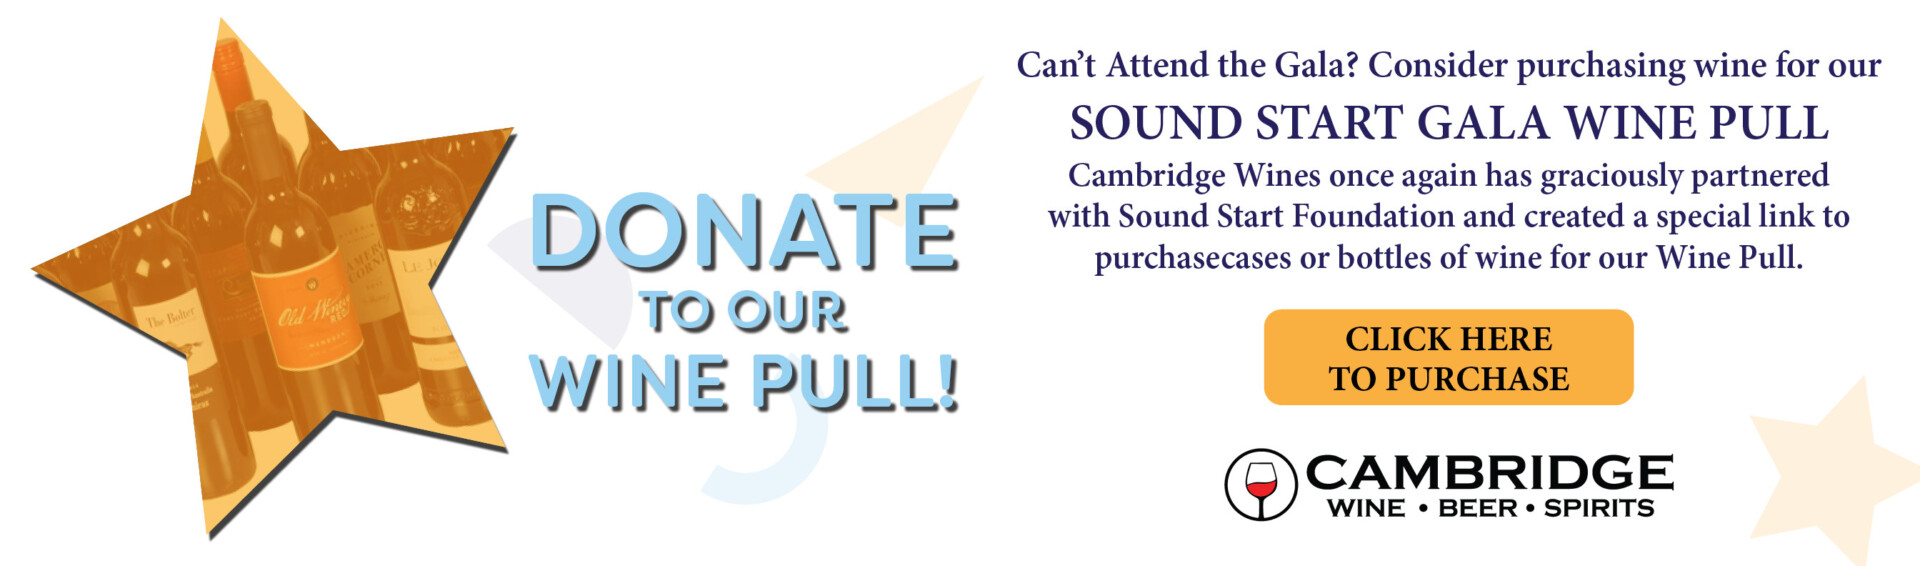 Donate to our Wine Pull!